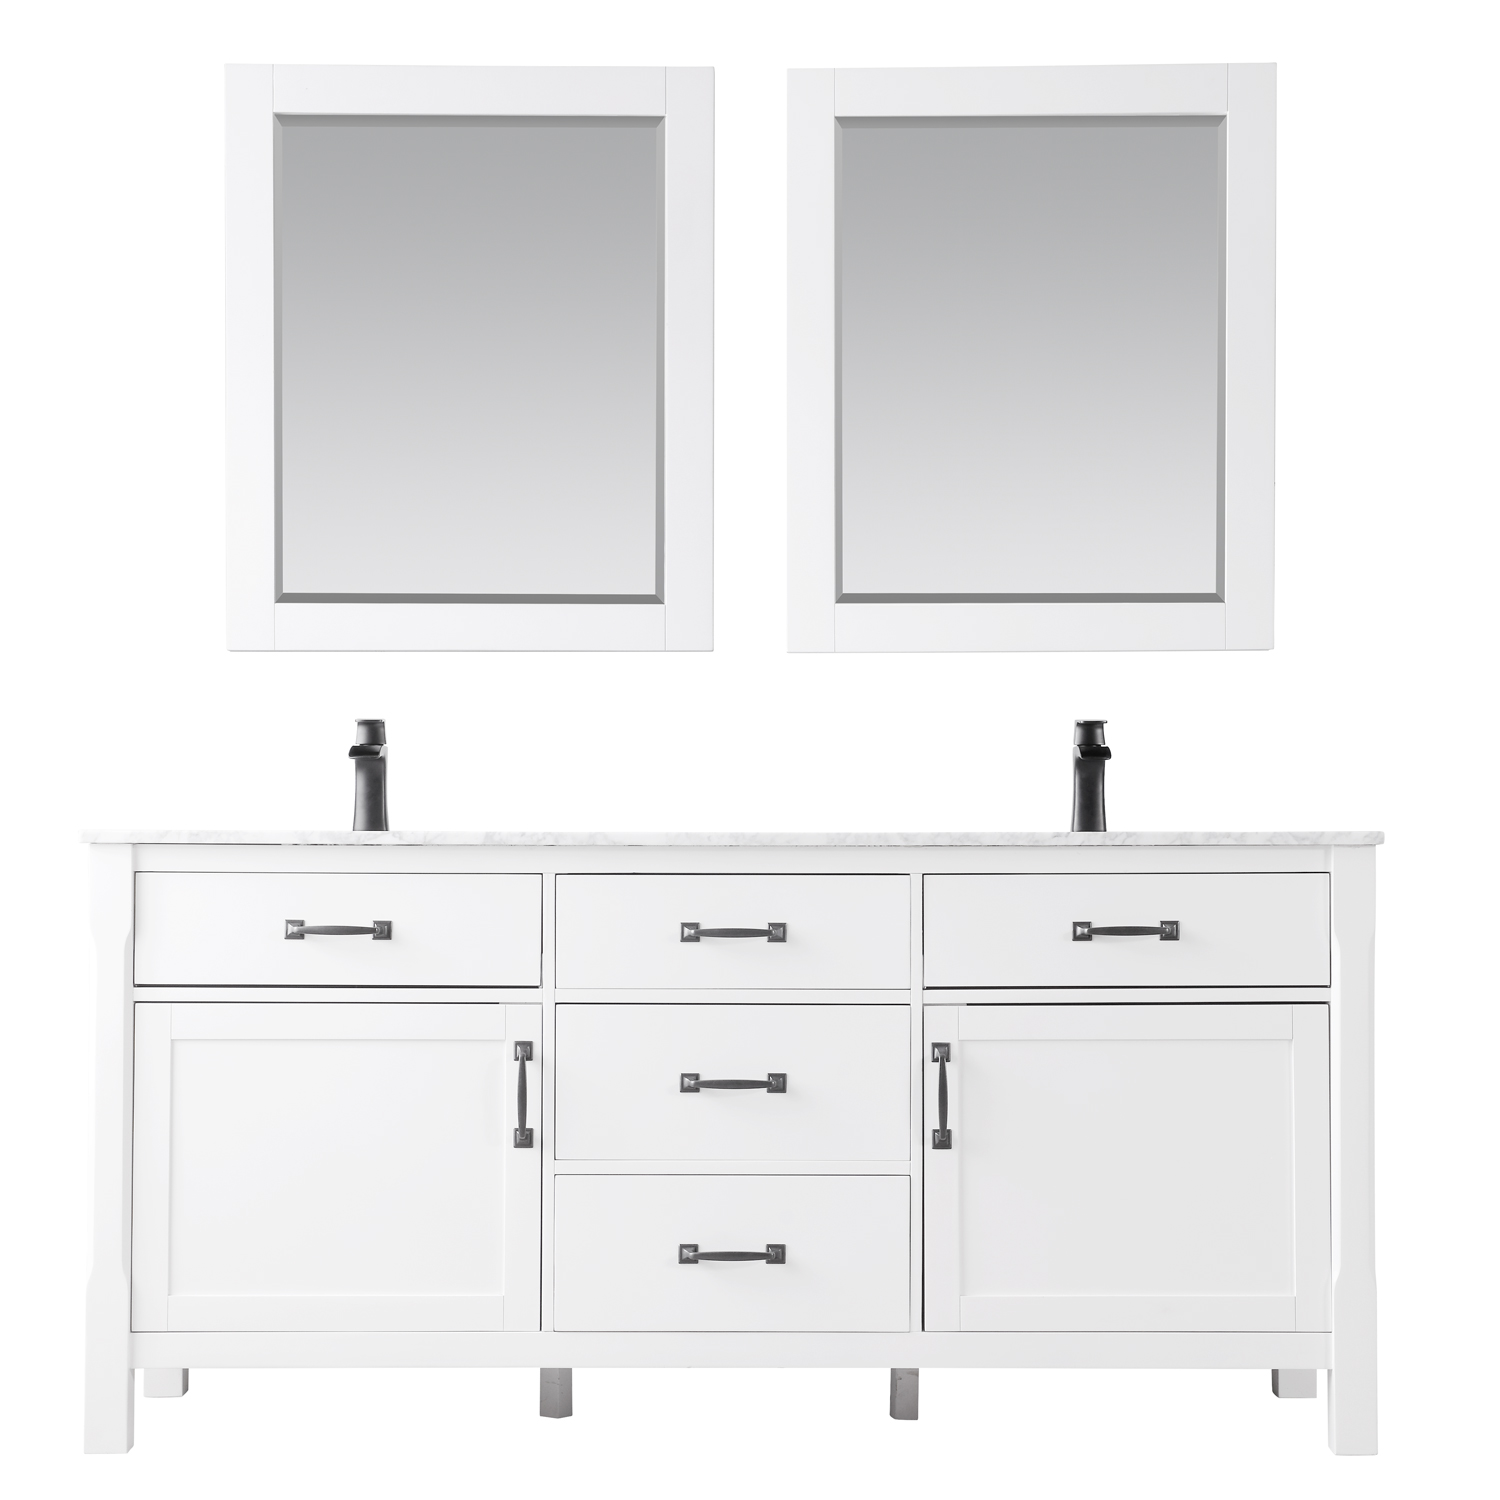 Issac Edwards Collection  72" Double Bathroom Vanity Set in White and Carrara White Marble Countertop without Mirror